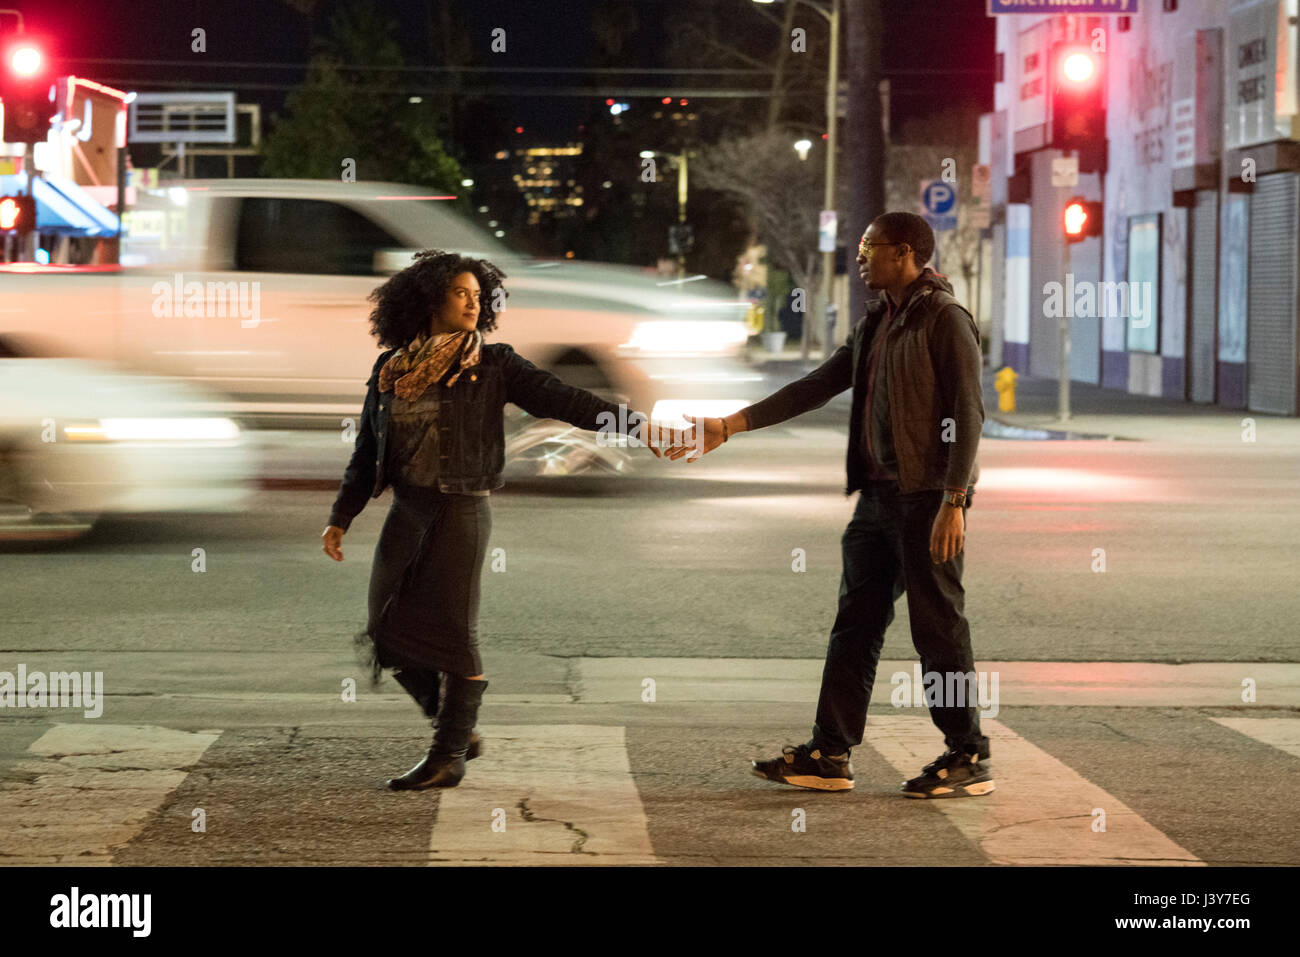 Couple holding hands on pedestrian crossing, Los Angeles, California, USA Stock Photo